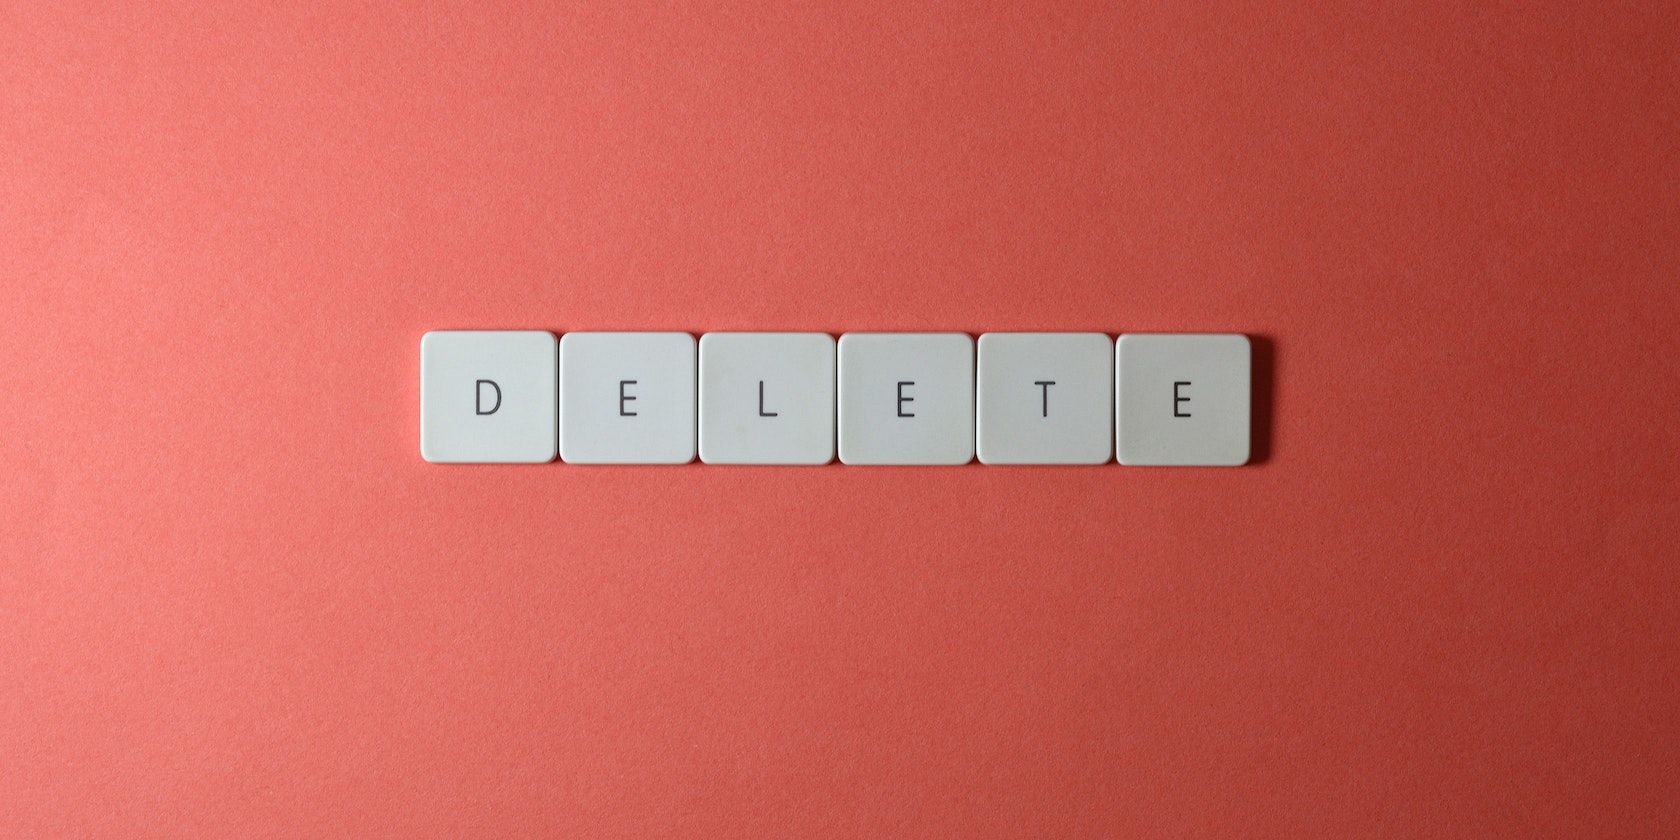 The Delete Word Made With Keyboard Keys on Red Background